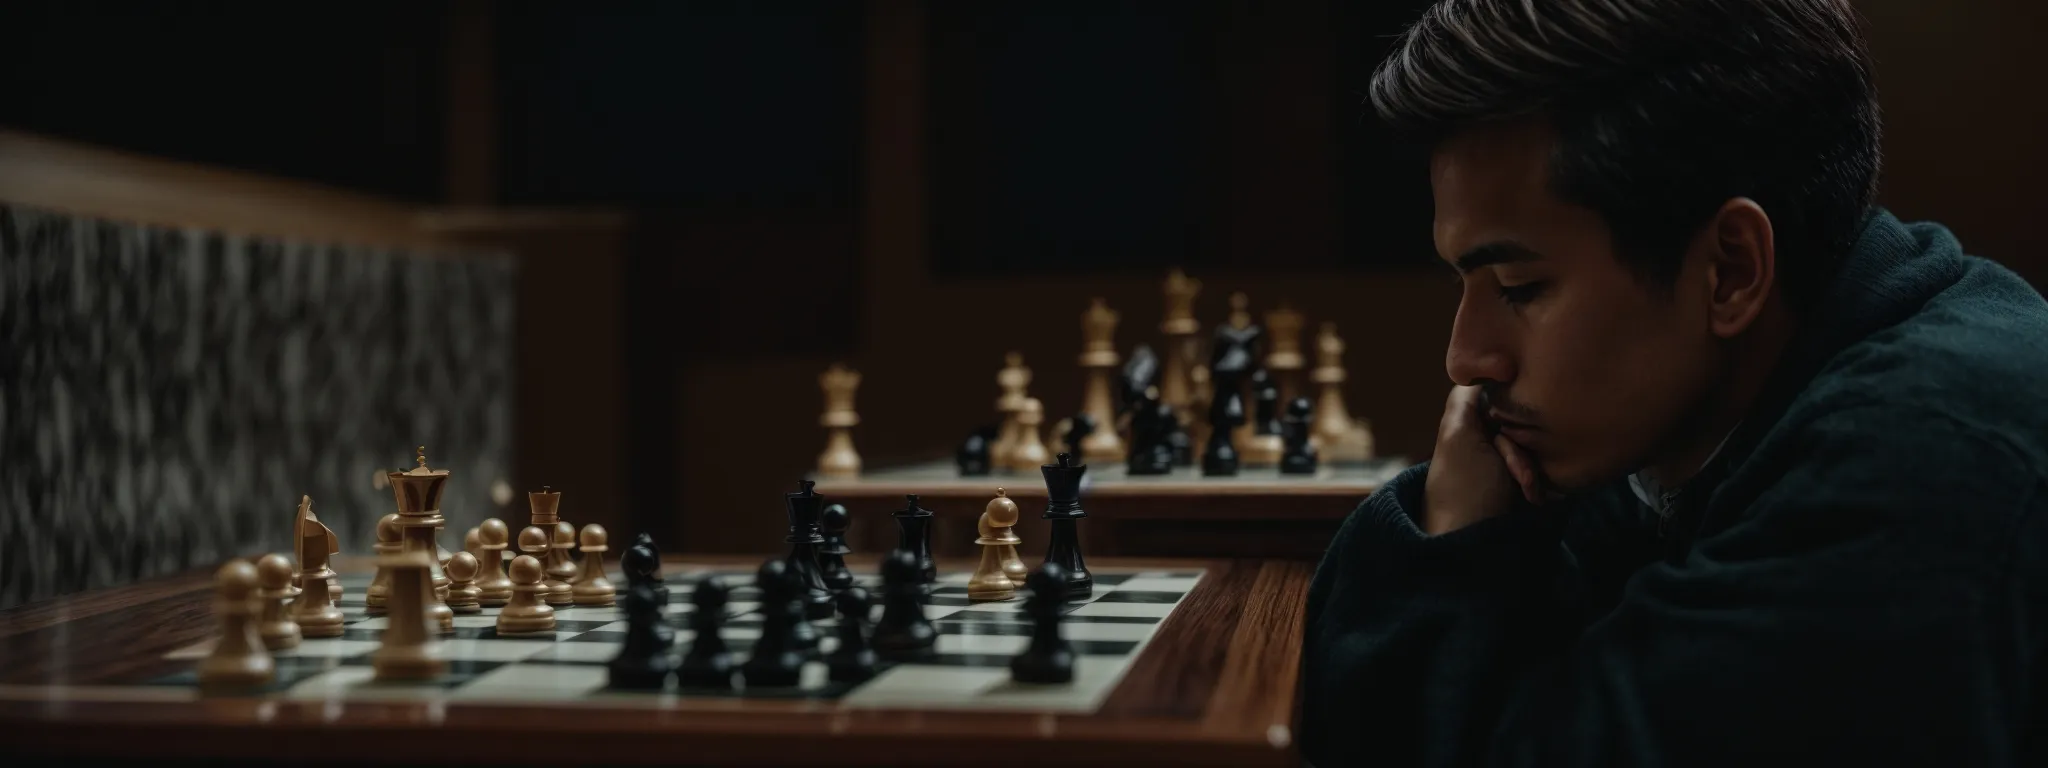 a chess player contemplating a strategic move on a chessboard.